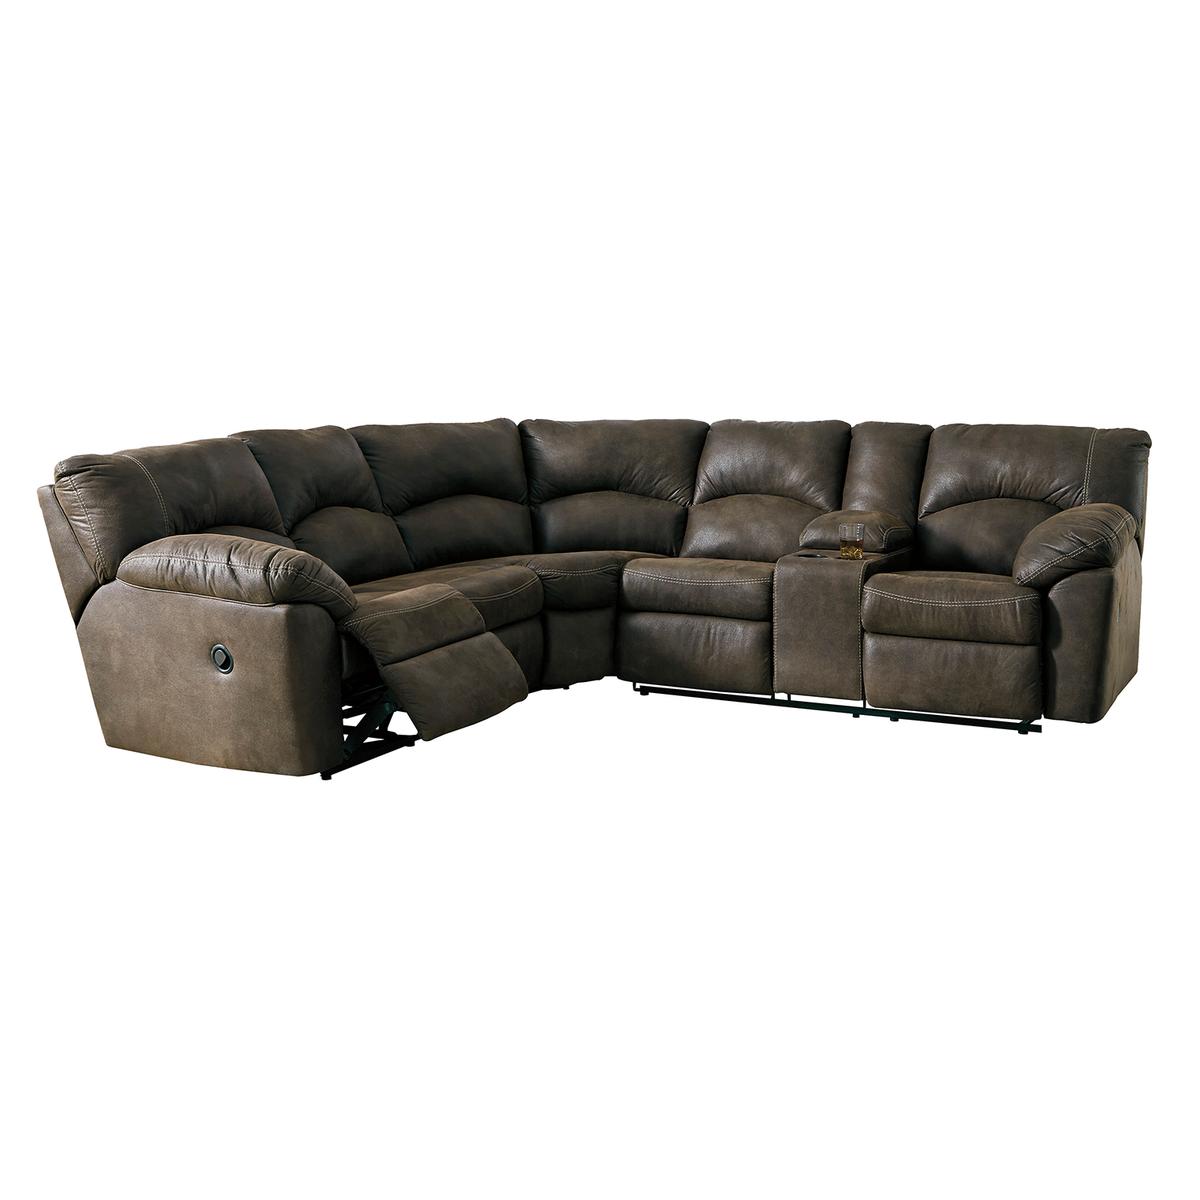 *Ashley Tambo Reclining Sectional Was $1700.00  Now: $1299.99